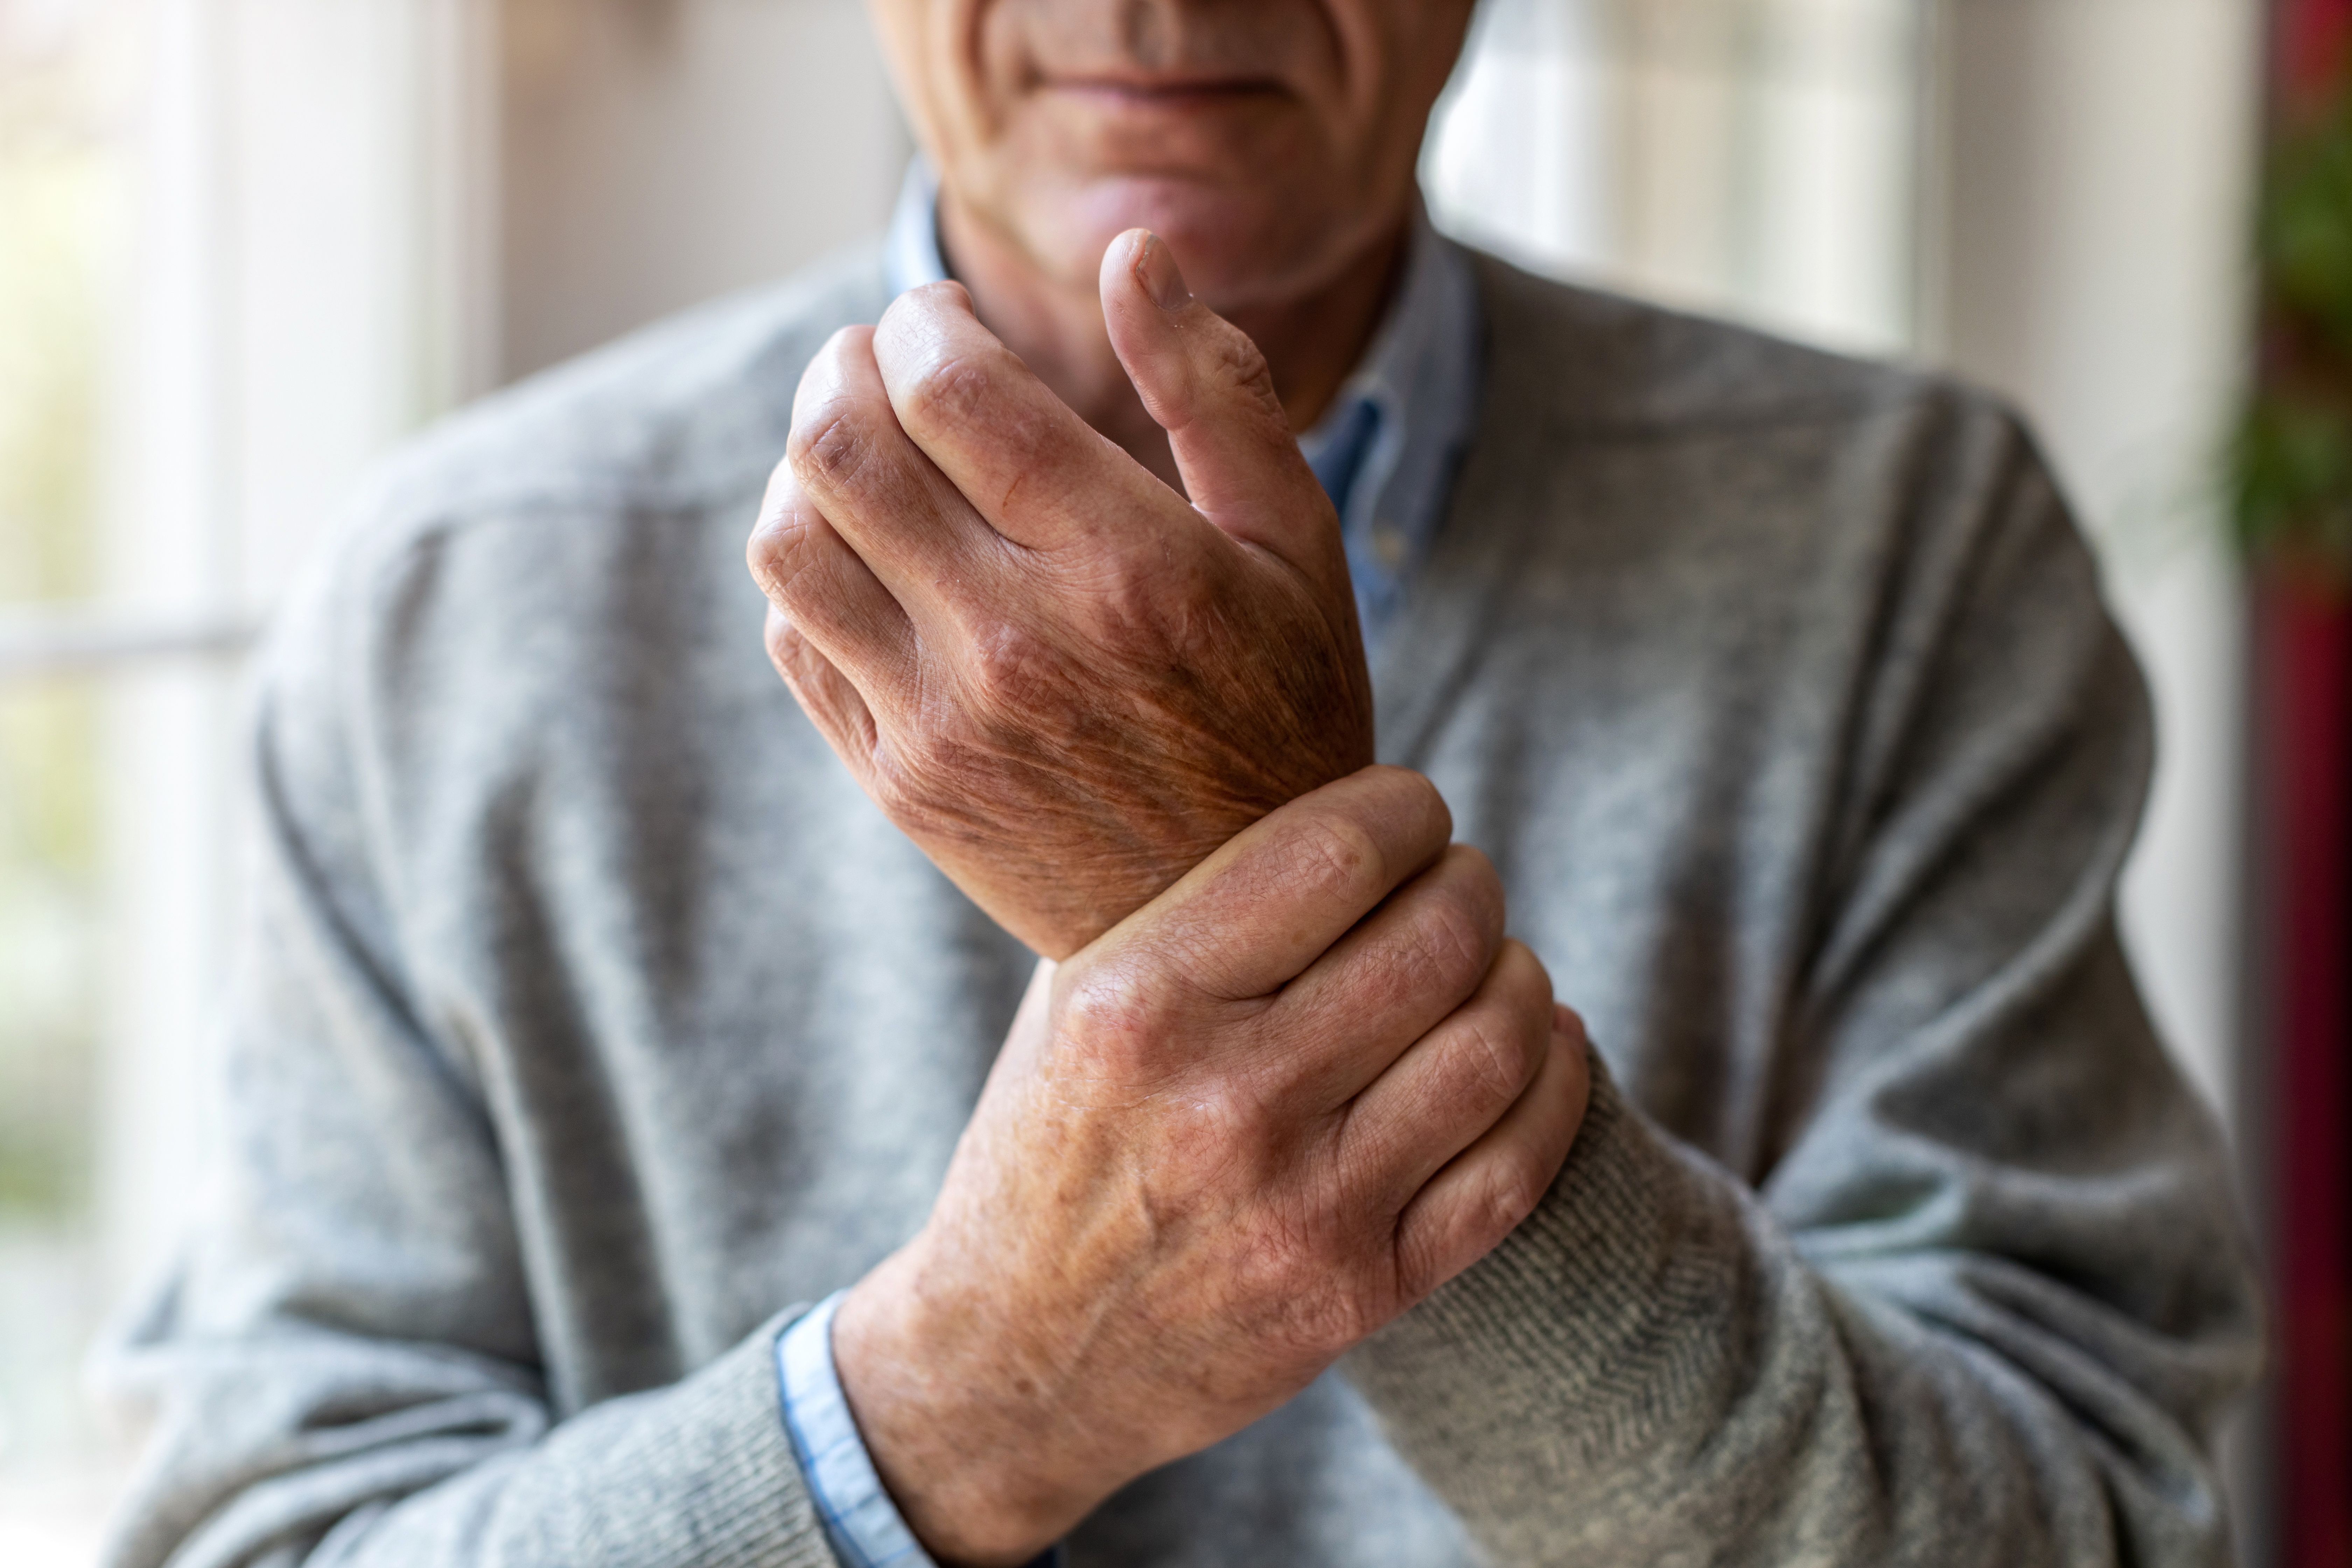 Higher rates of infection reported in tofacitinib versus TNFi in patients with rheumatoid arthritis